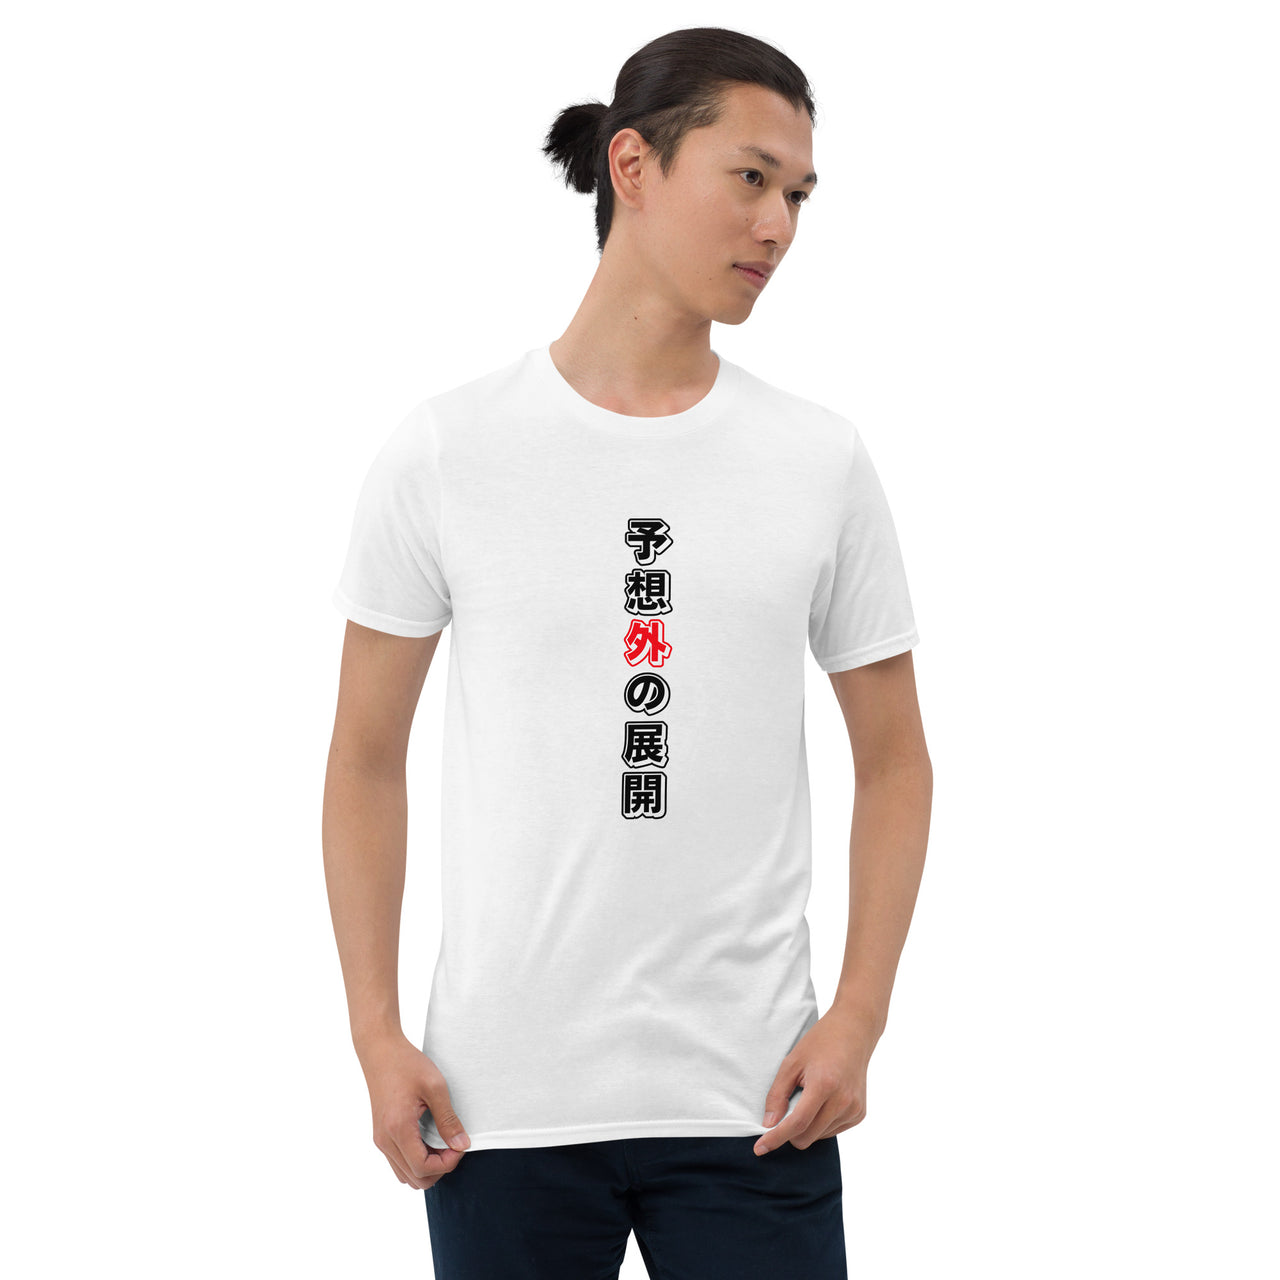 An Unexpected Turn of Events in Japanese T-Shirt